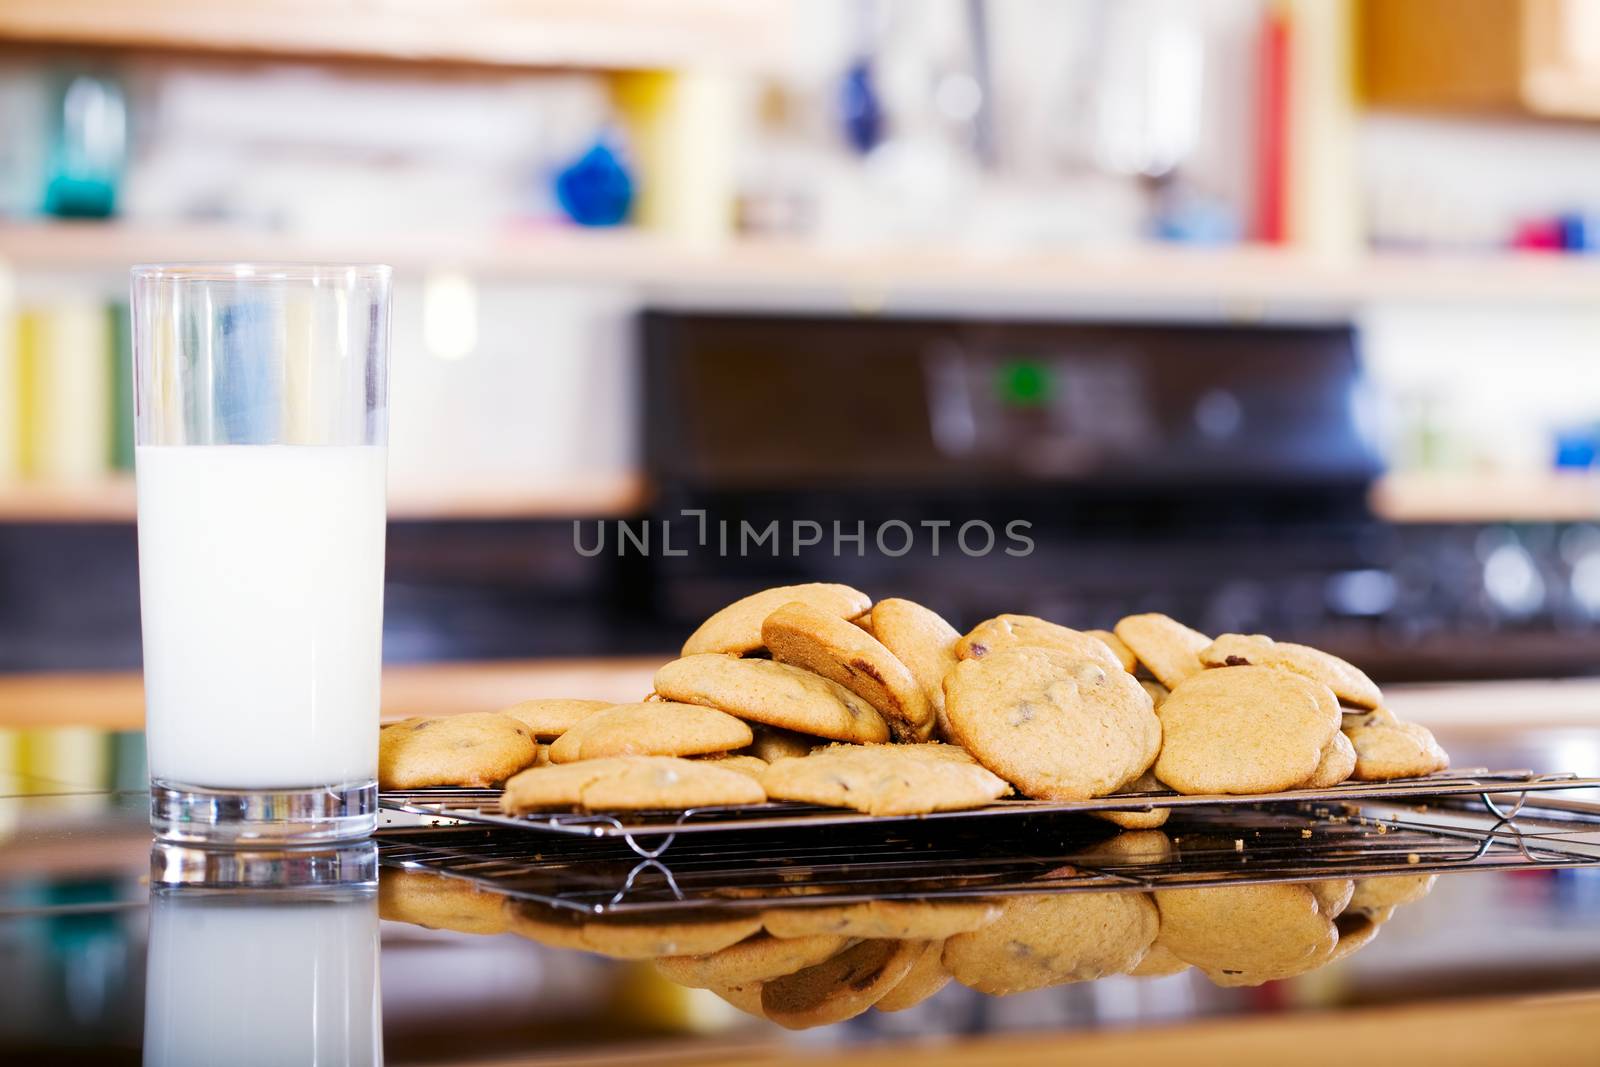 Snack of milk and cookies on kitchen counter